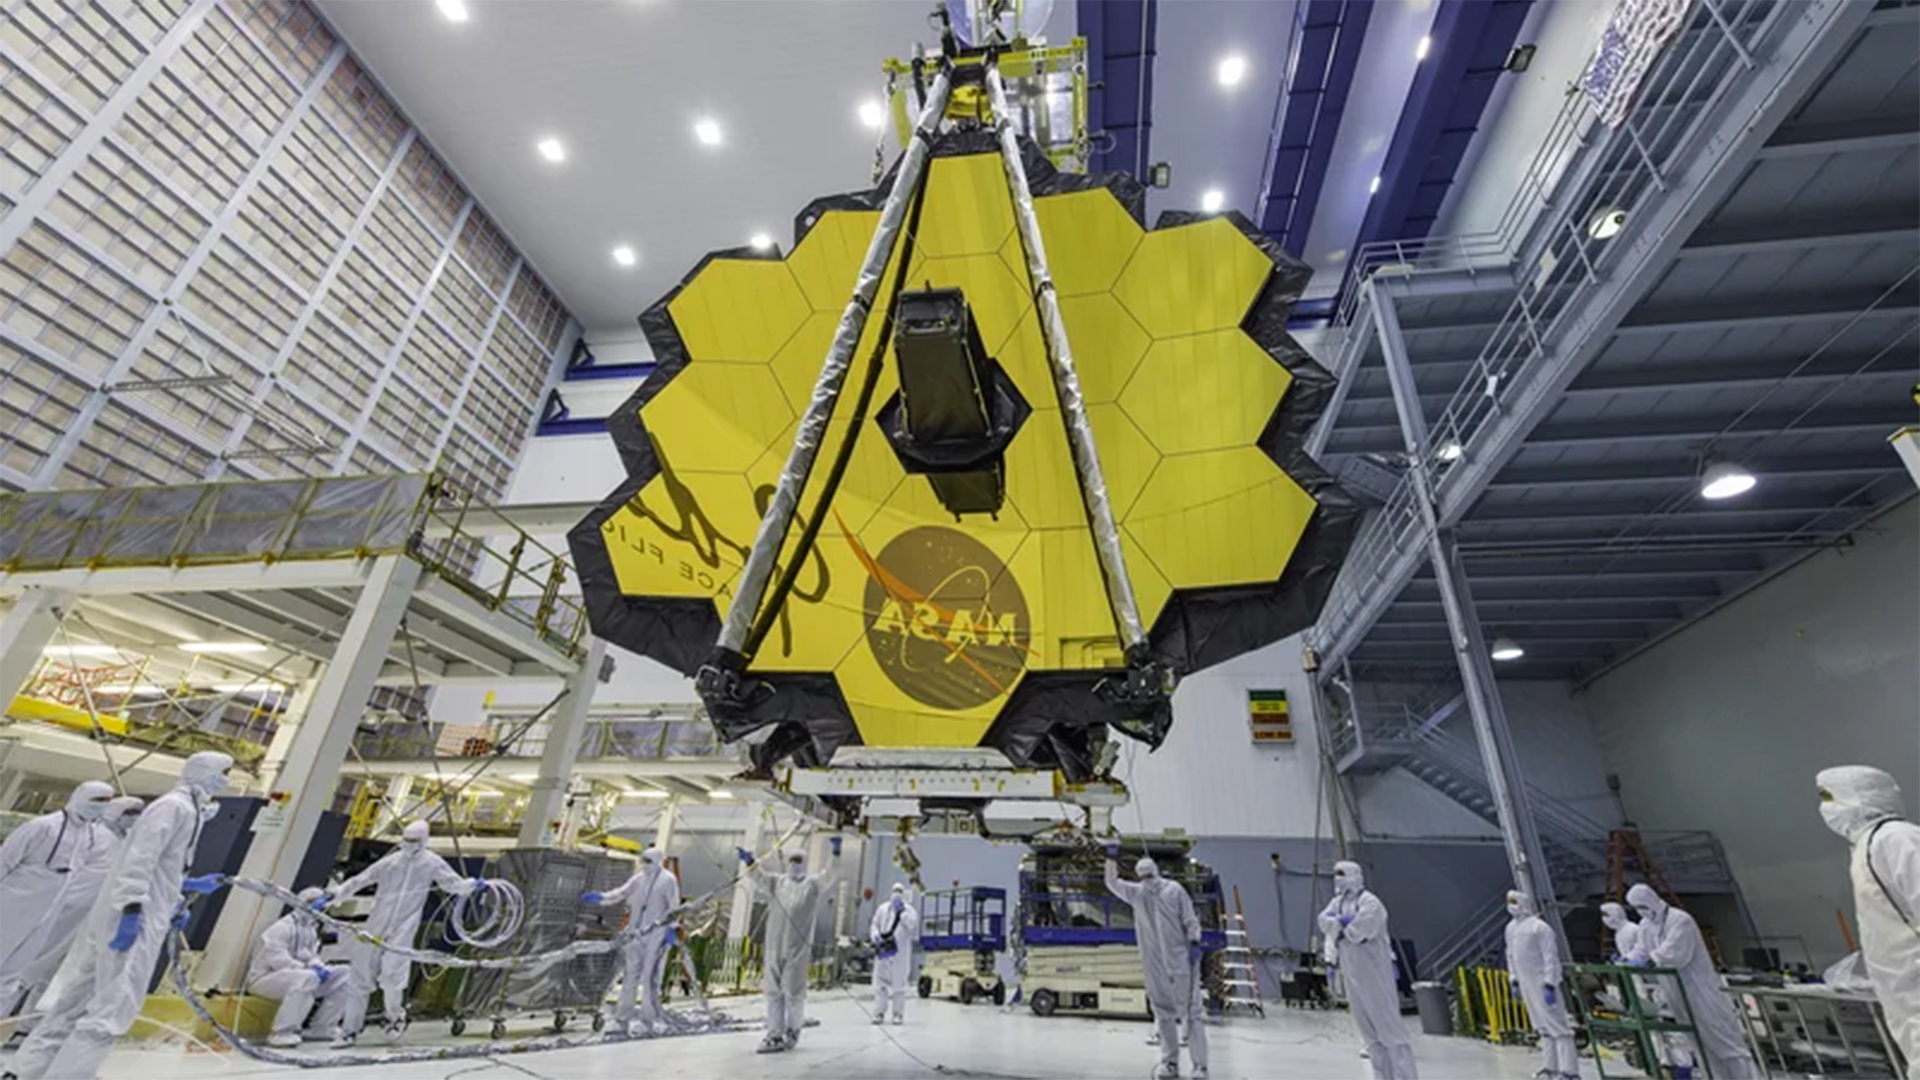 In this April 13, 2017 photo provided by NASA, technicians lift the mirror of the James Webb Space Telescope using a crane at the Goddard Space Flight Center in Greenbelt, Md. The telescope is designed to peer back so far that scientists will get a glimpse of the dawn of the universe about 13.7 billion years ago and zoom in on closer cosmic objects with sharper focus.